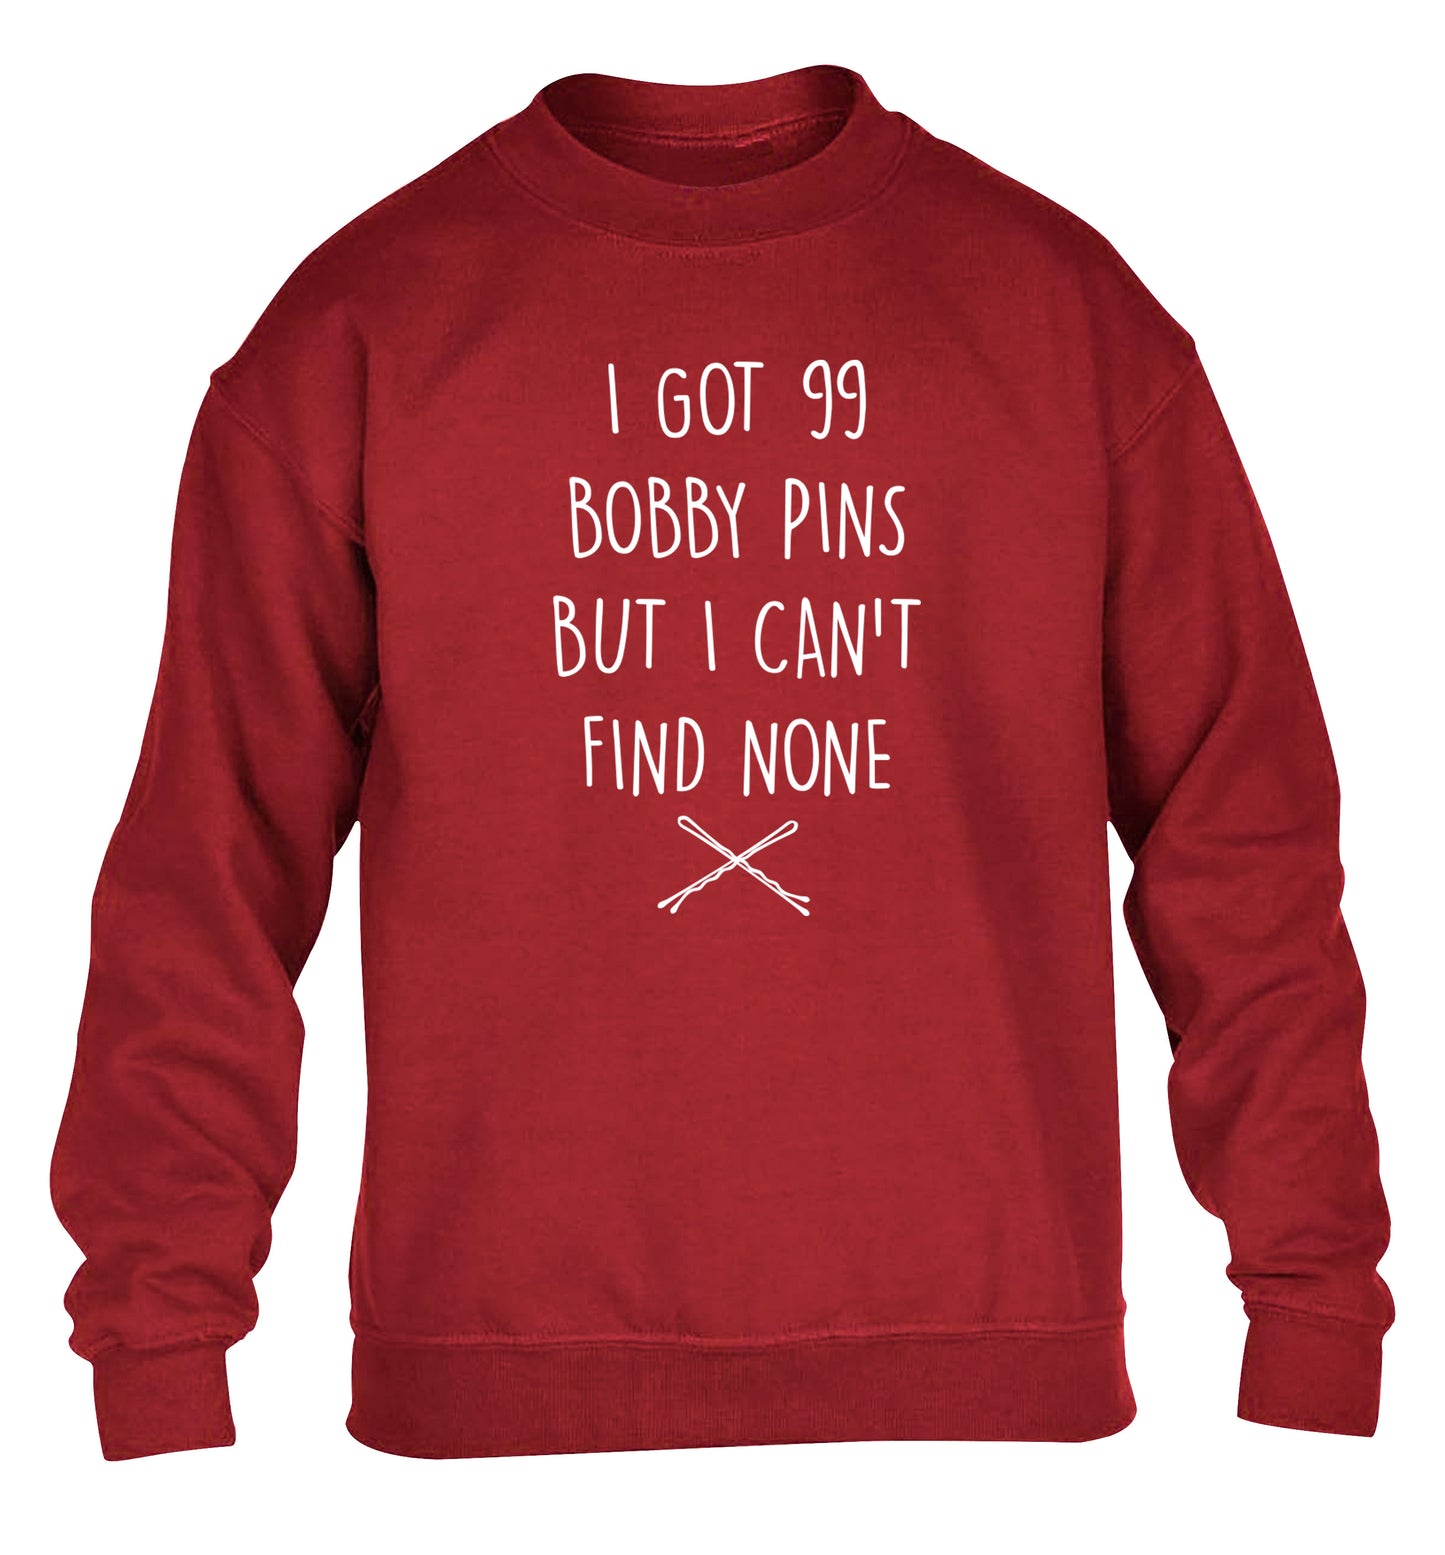 I got 99 bobby pins but I can't find none children's grey sweater 12-14 Years